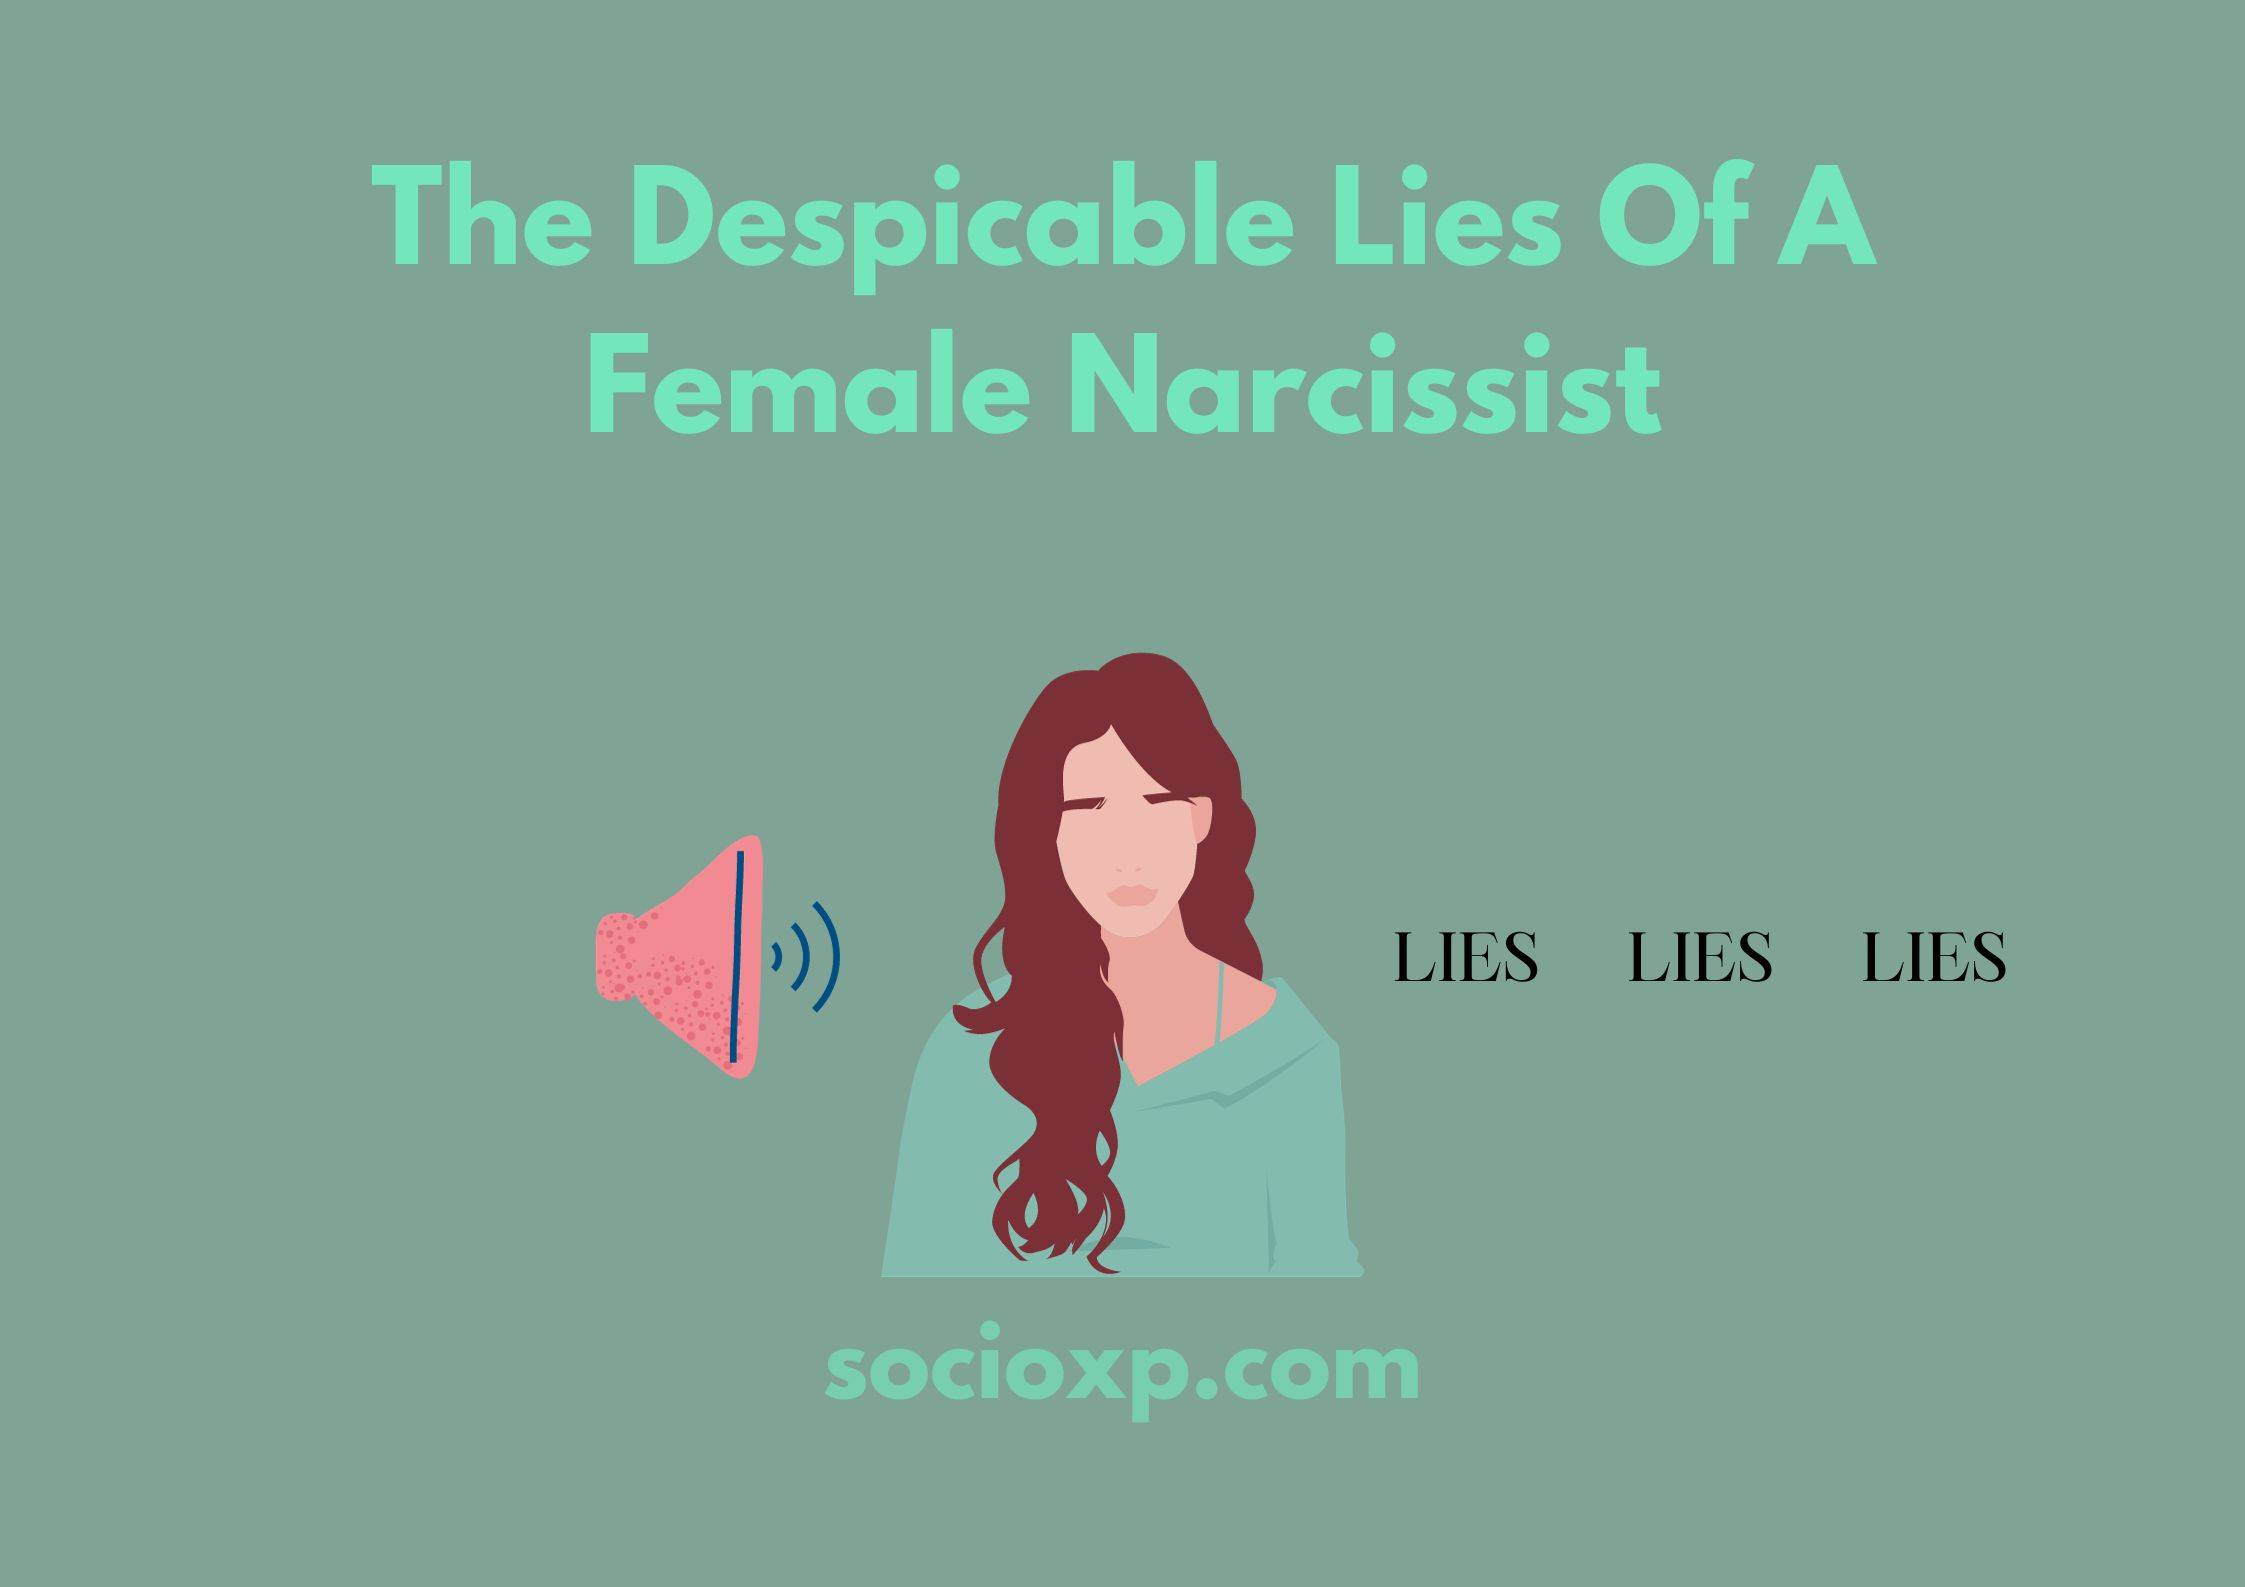 The Despicable Lies Of A Female Narcissist